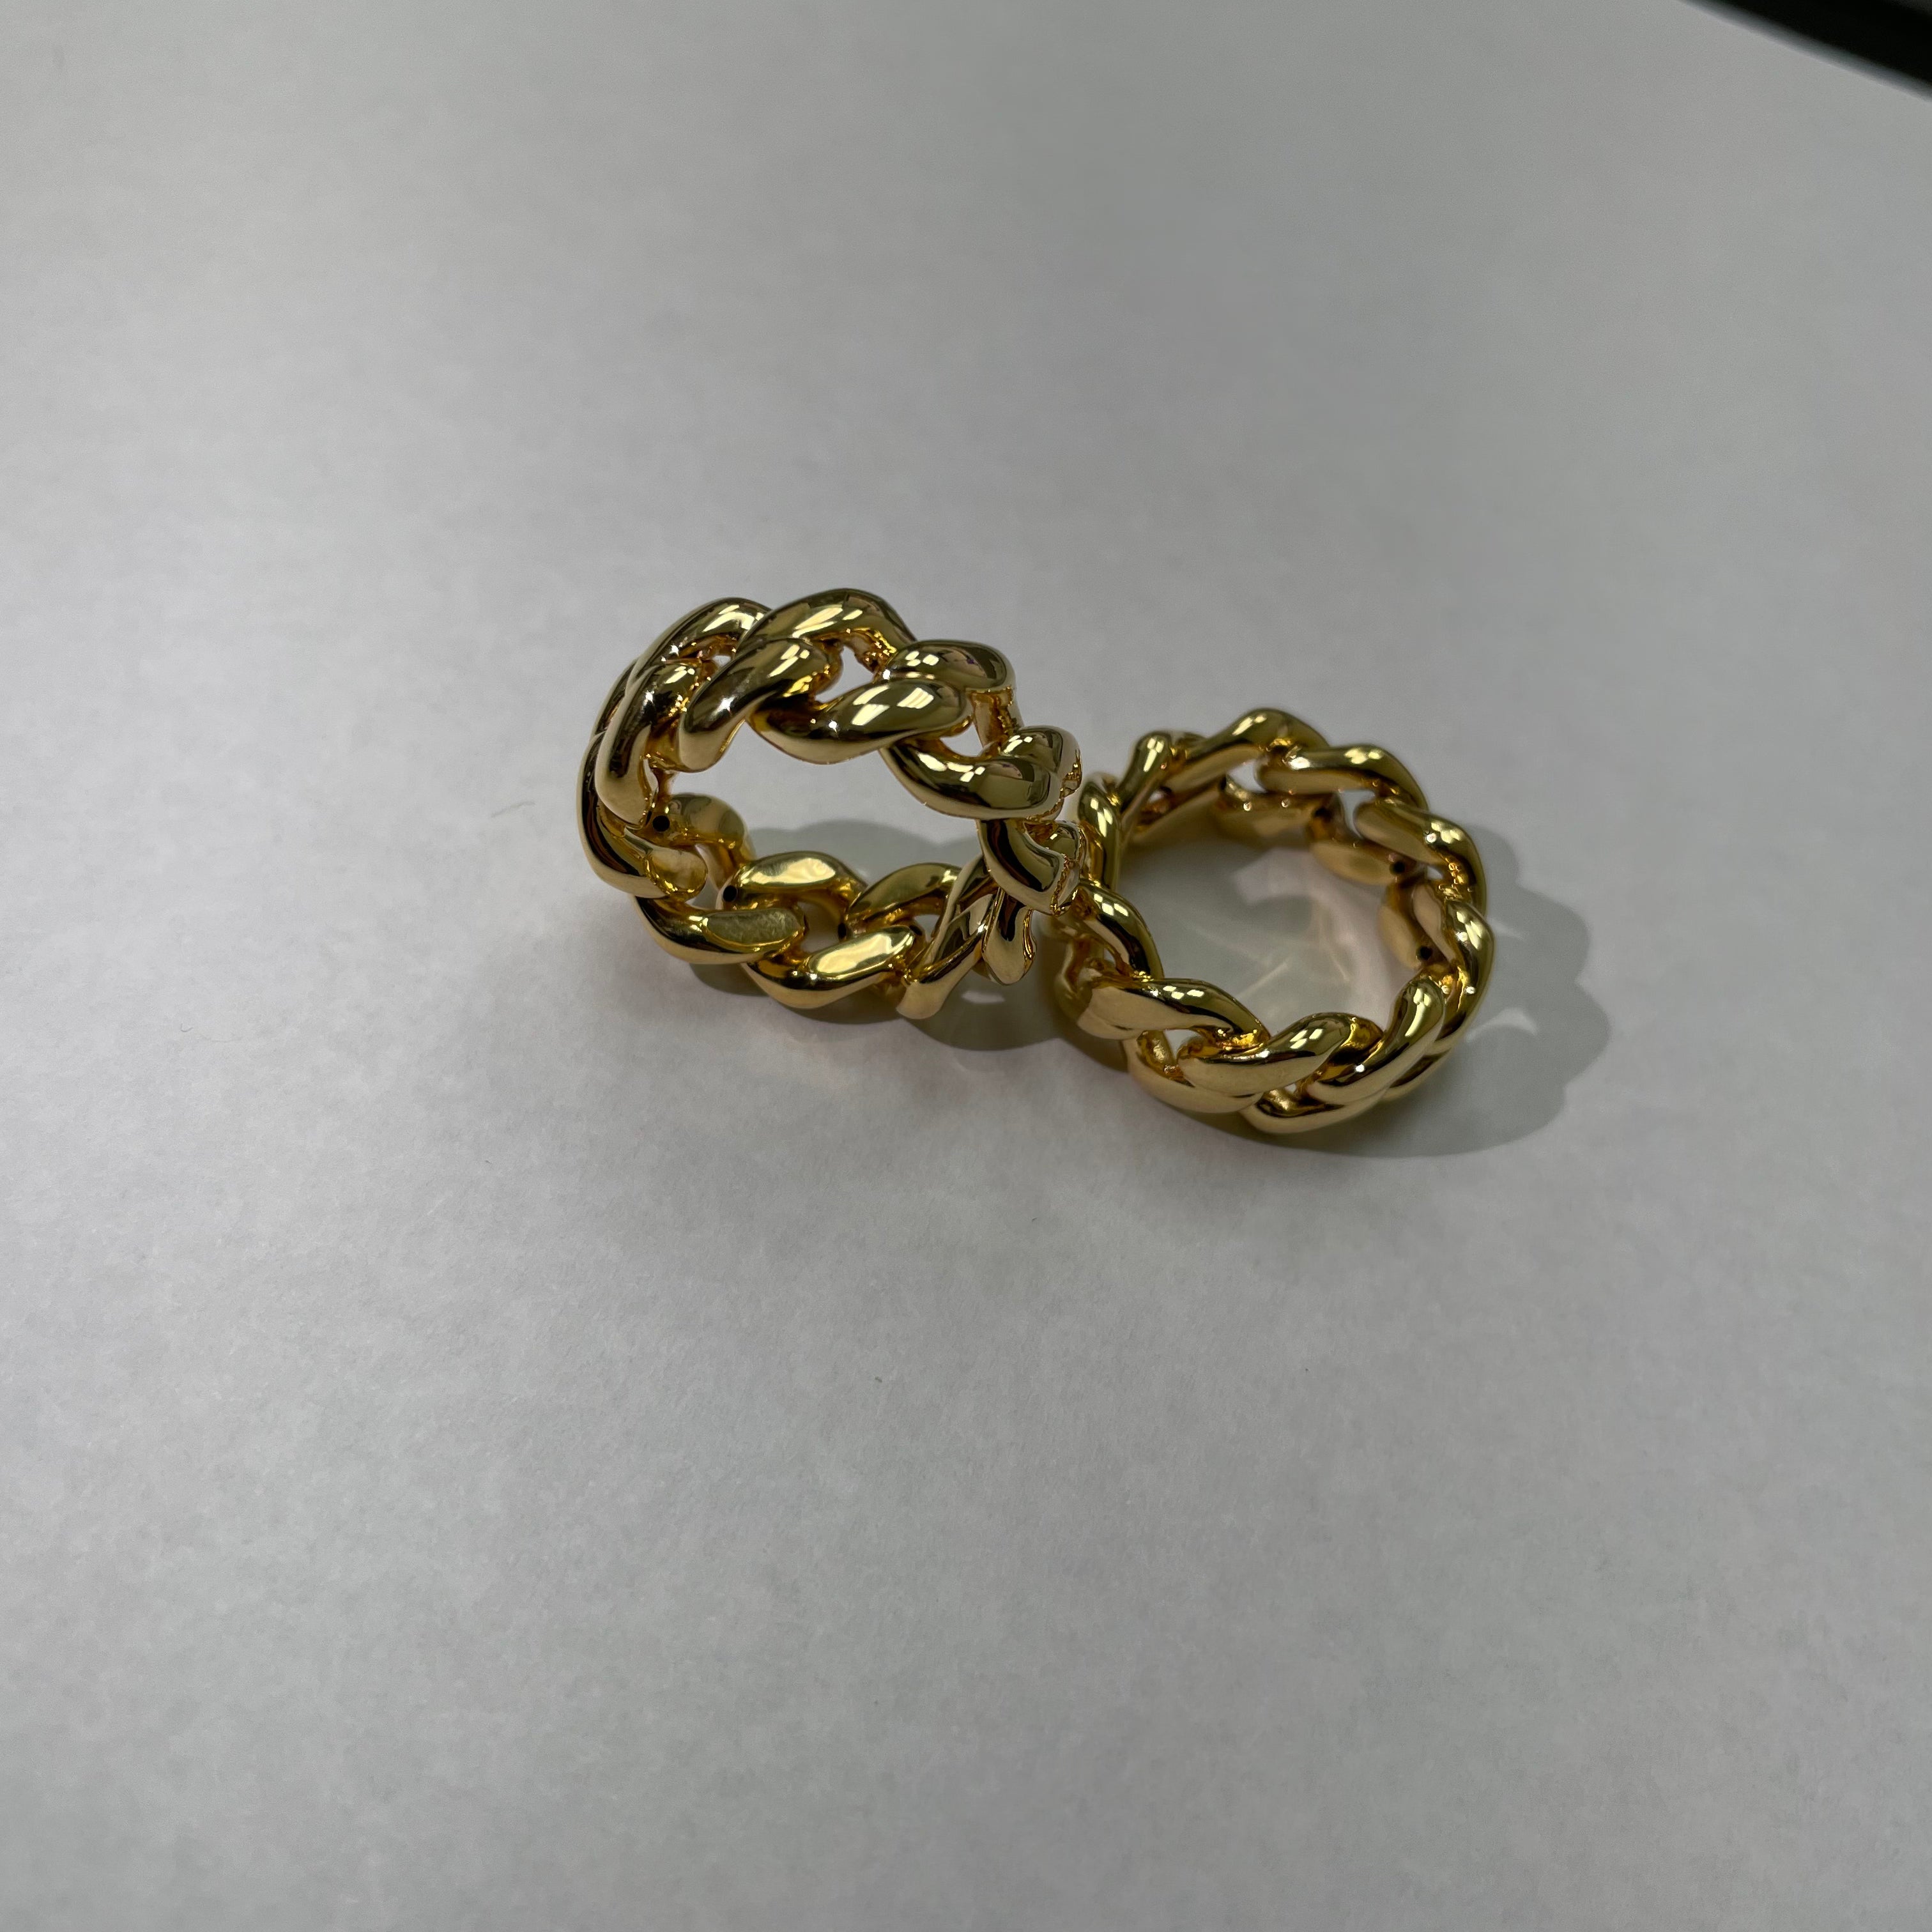 Hollow 18K Cuban Ring size 7 (made in Italy)